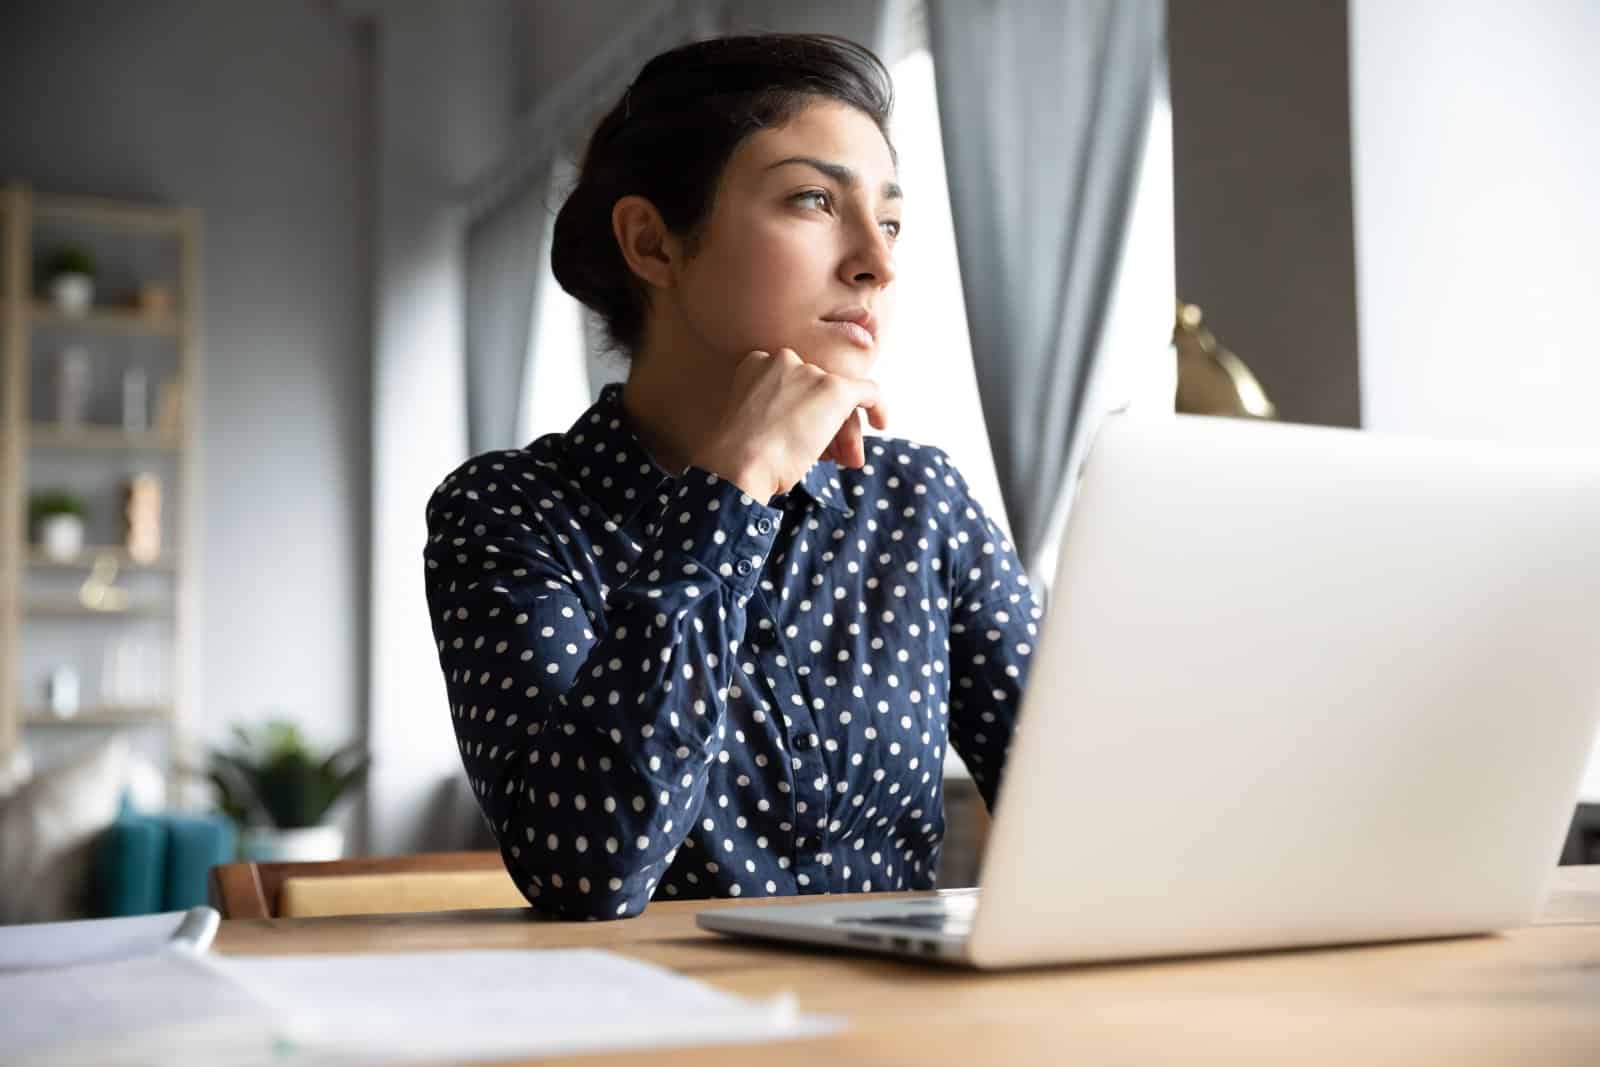 Image Credit: Shutterstock / fizkes <p><span>The increase would also be beneficial in breaking through the glass ceiling, which is a business tactic used to undermine women’s pay in the work environment. Doing so may offer more opportunities for women to be treated more fairly and better compensated.</span></p>